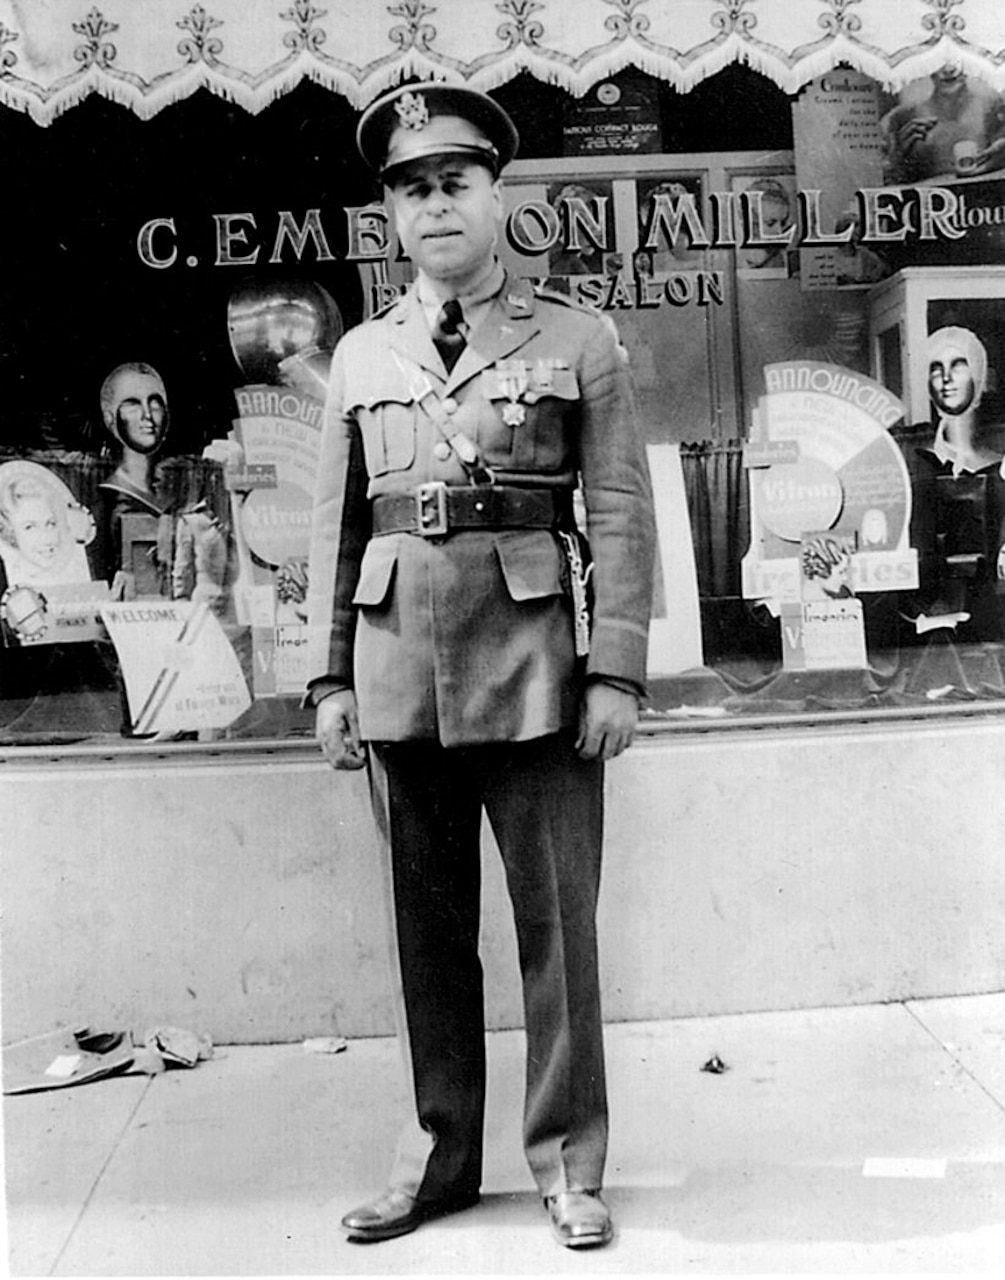 A person in a military uniform stands in front of a storefront.